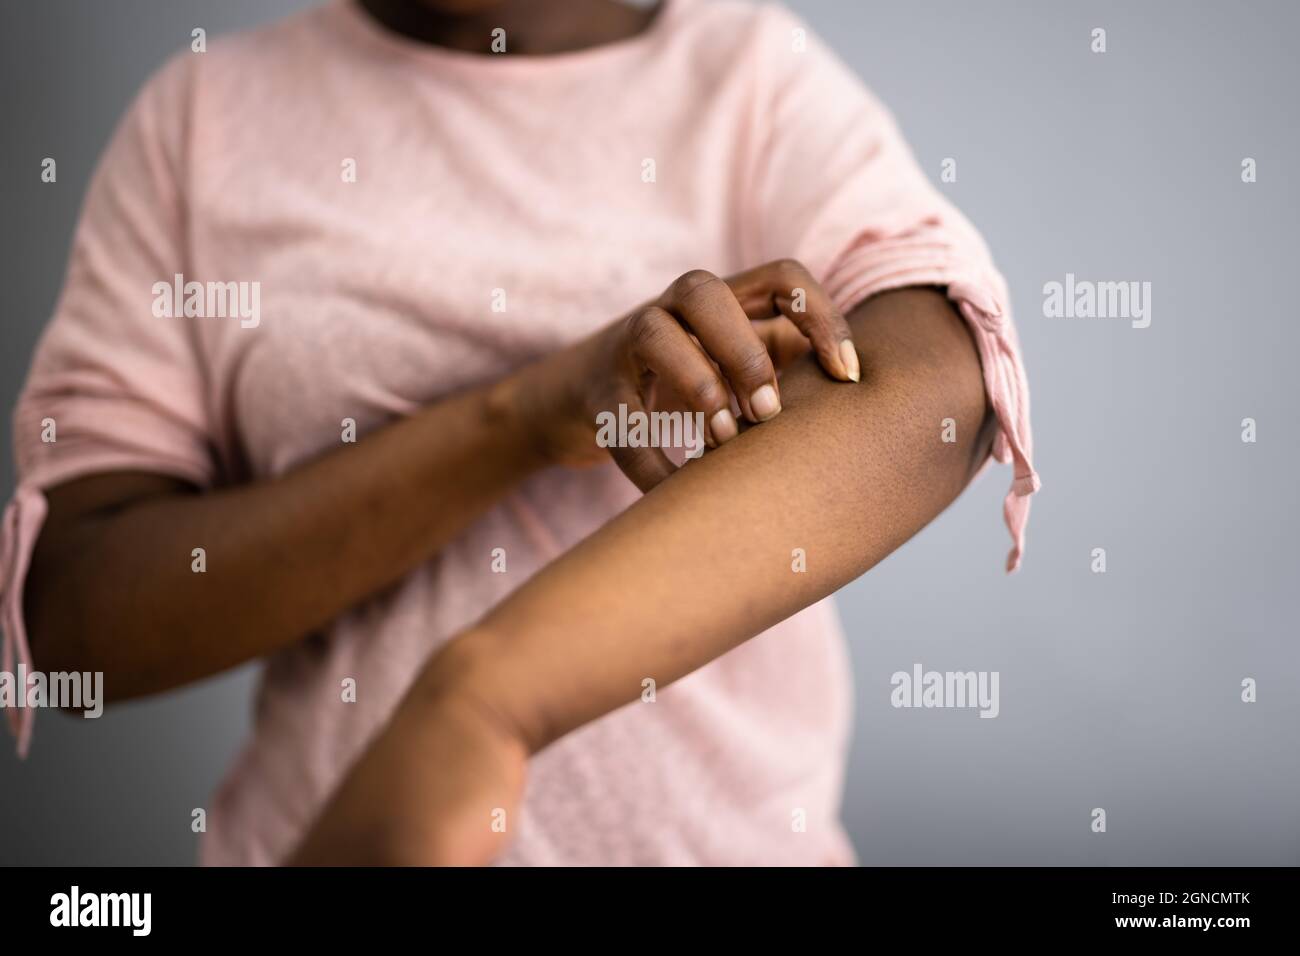 African American Woman With Itchy Skin. Allergy Or Psoriasis Stock Photo